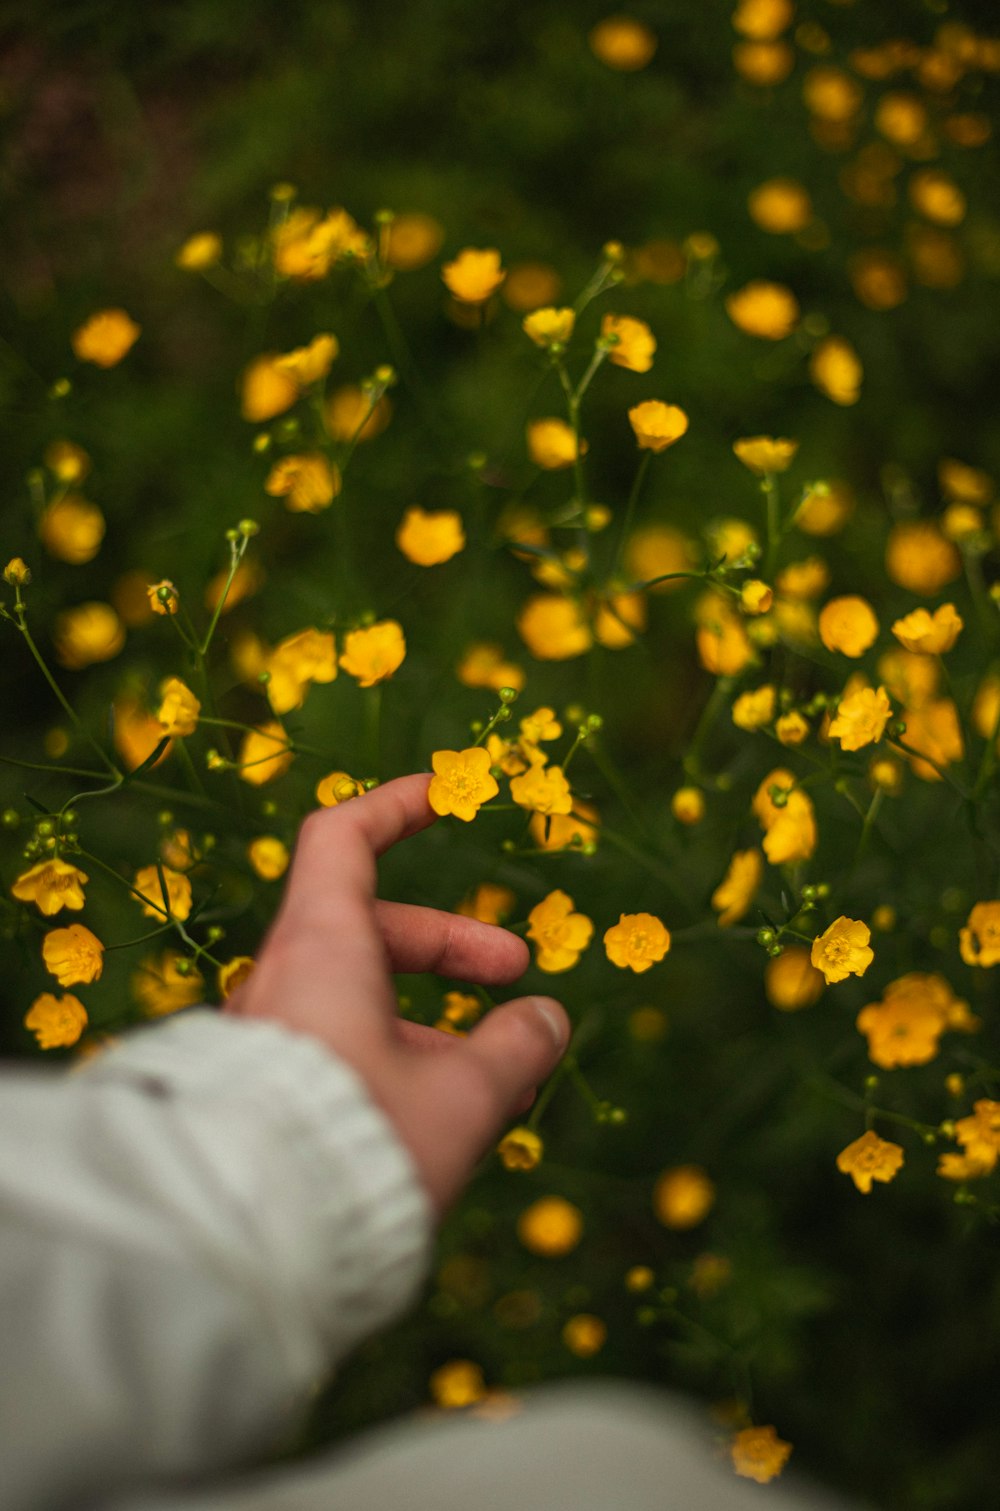 a hand reaching out towards a field of yellow flowers